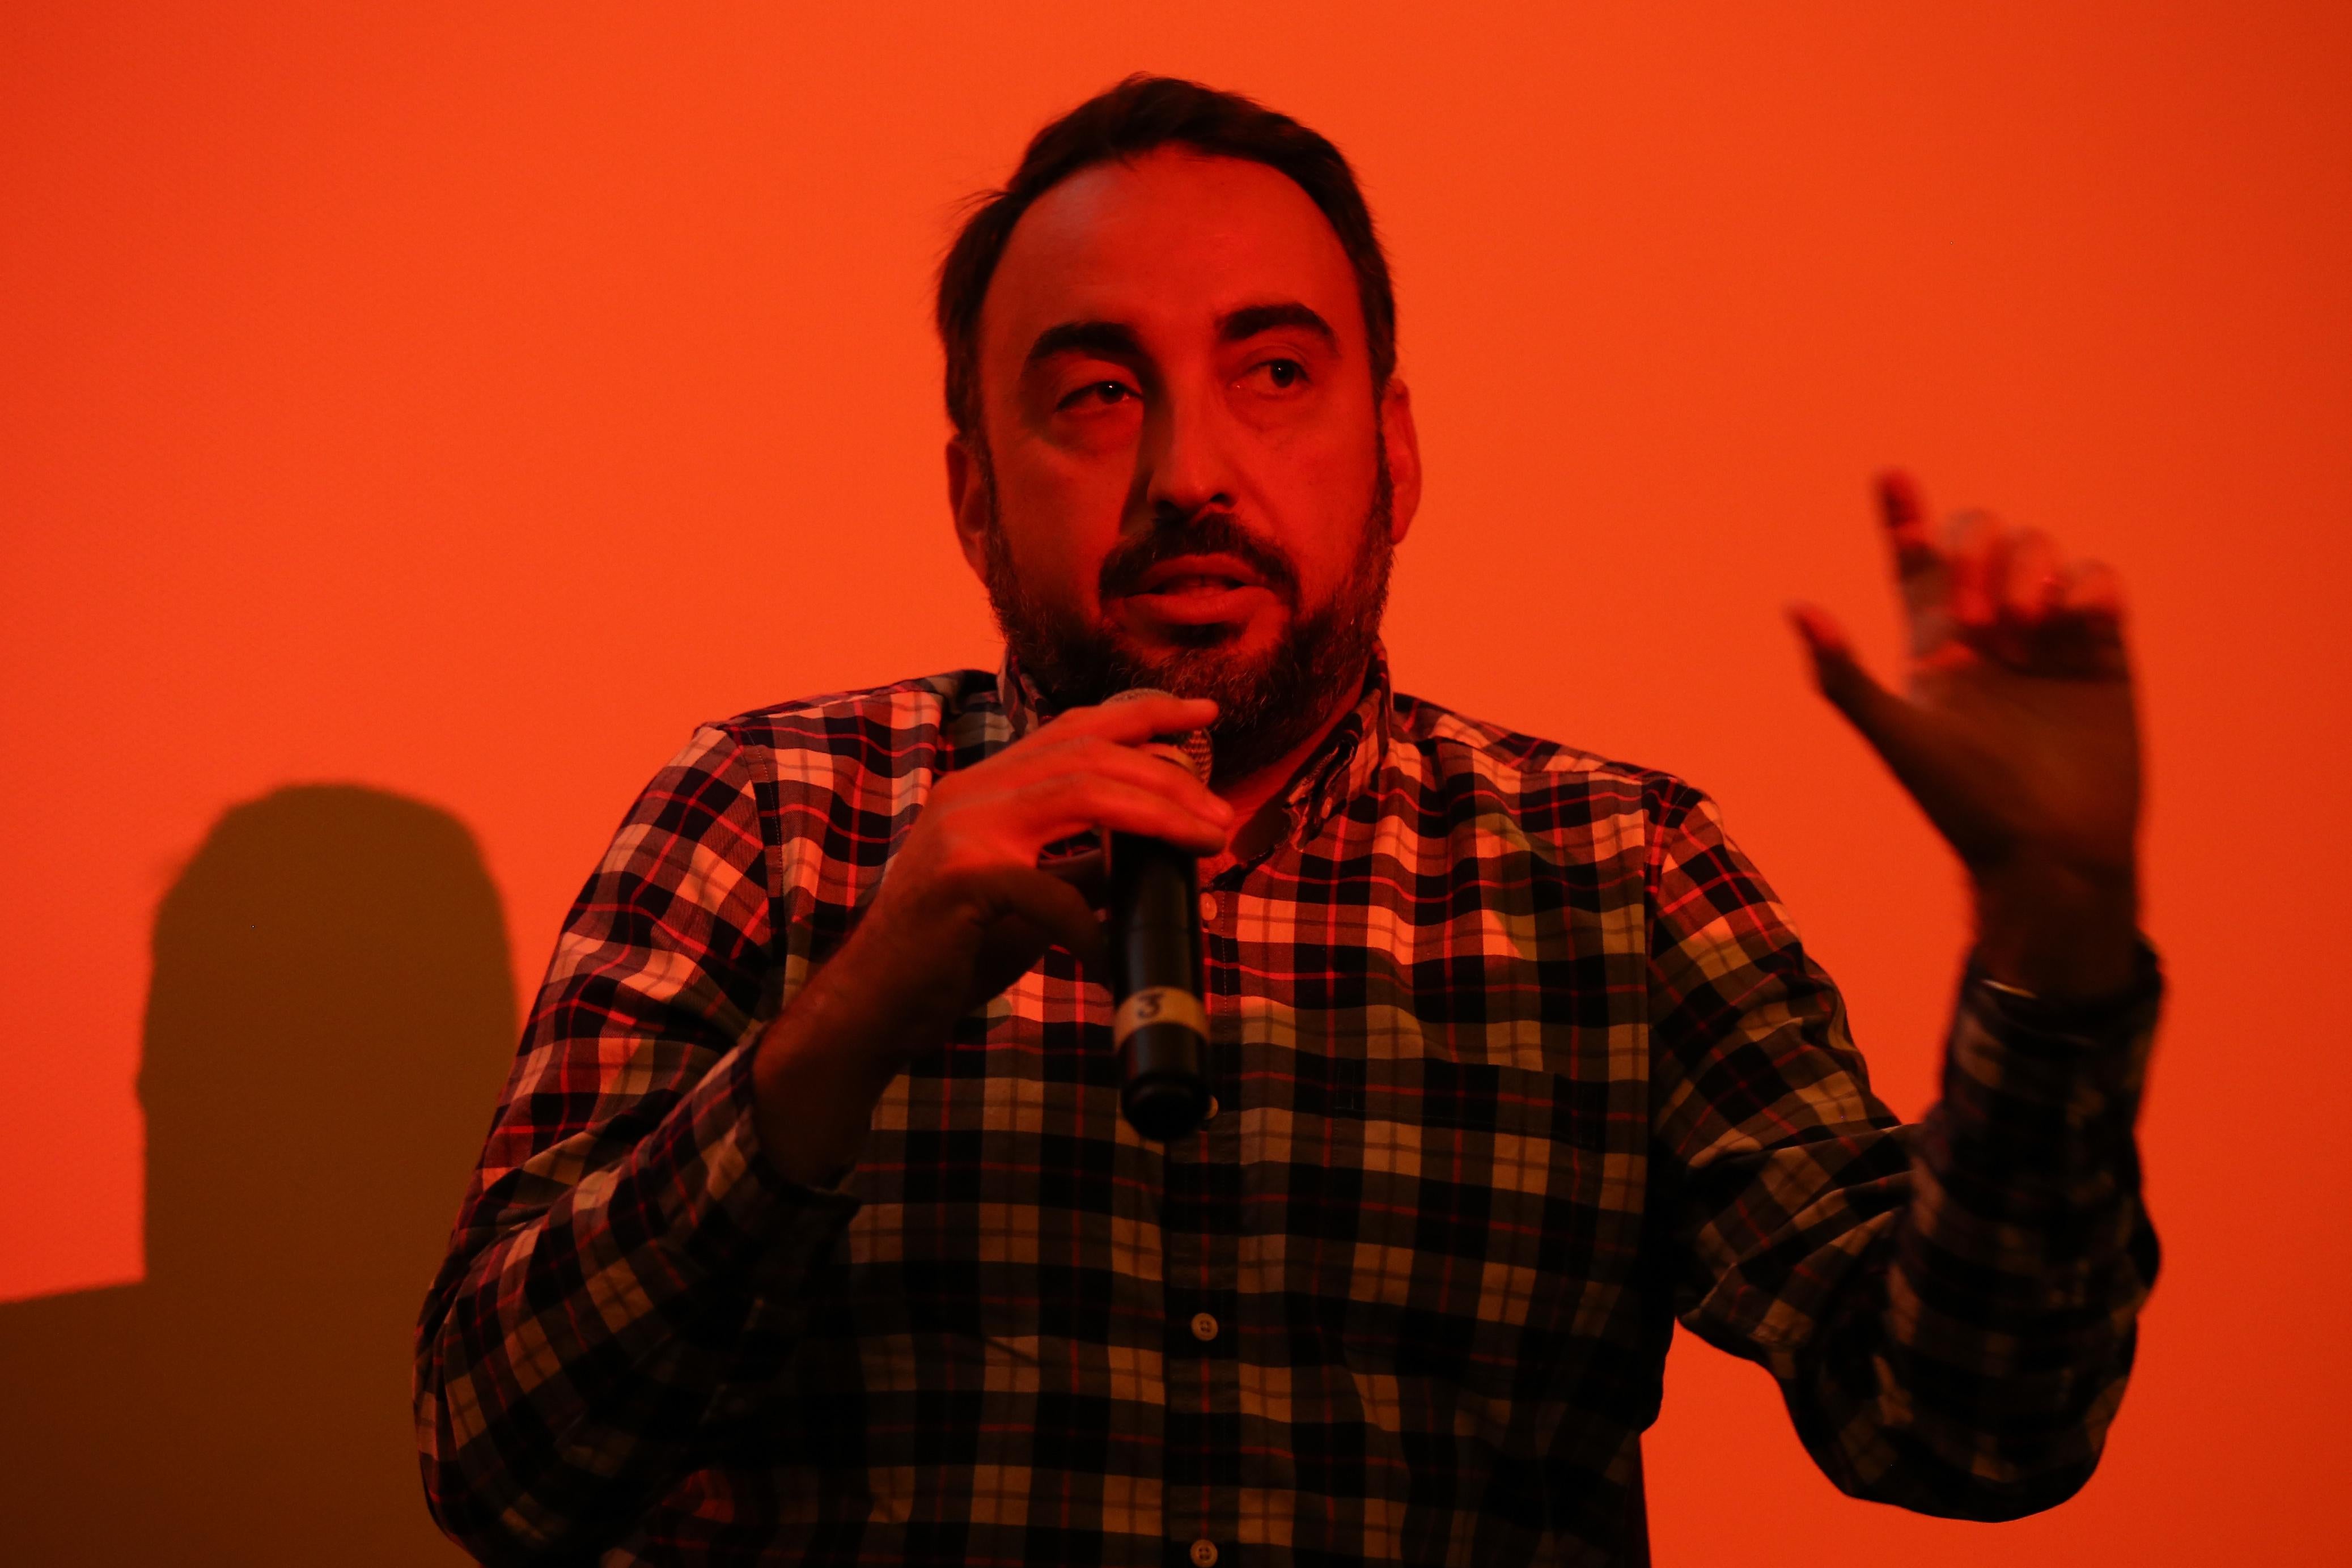 SAN FRANCISCO, CA - OCTOBER 14:  Alex Stamos speaks at WIRED25 Festival: WIRED Celebrates 25th Anniversary  Day 2 on October 14, 2018 in San Francisco, California.  (Photo by Phillip Faraone/Getty Images for WIRED25  )